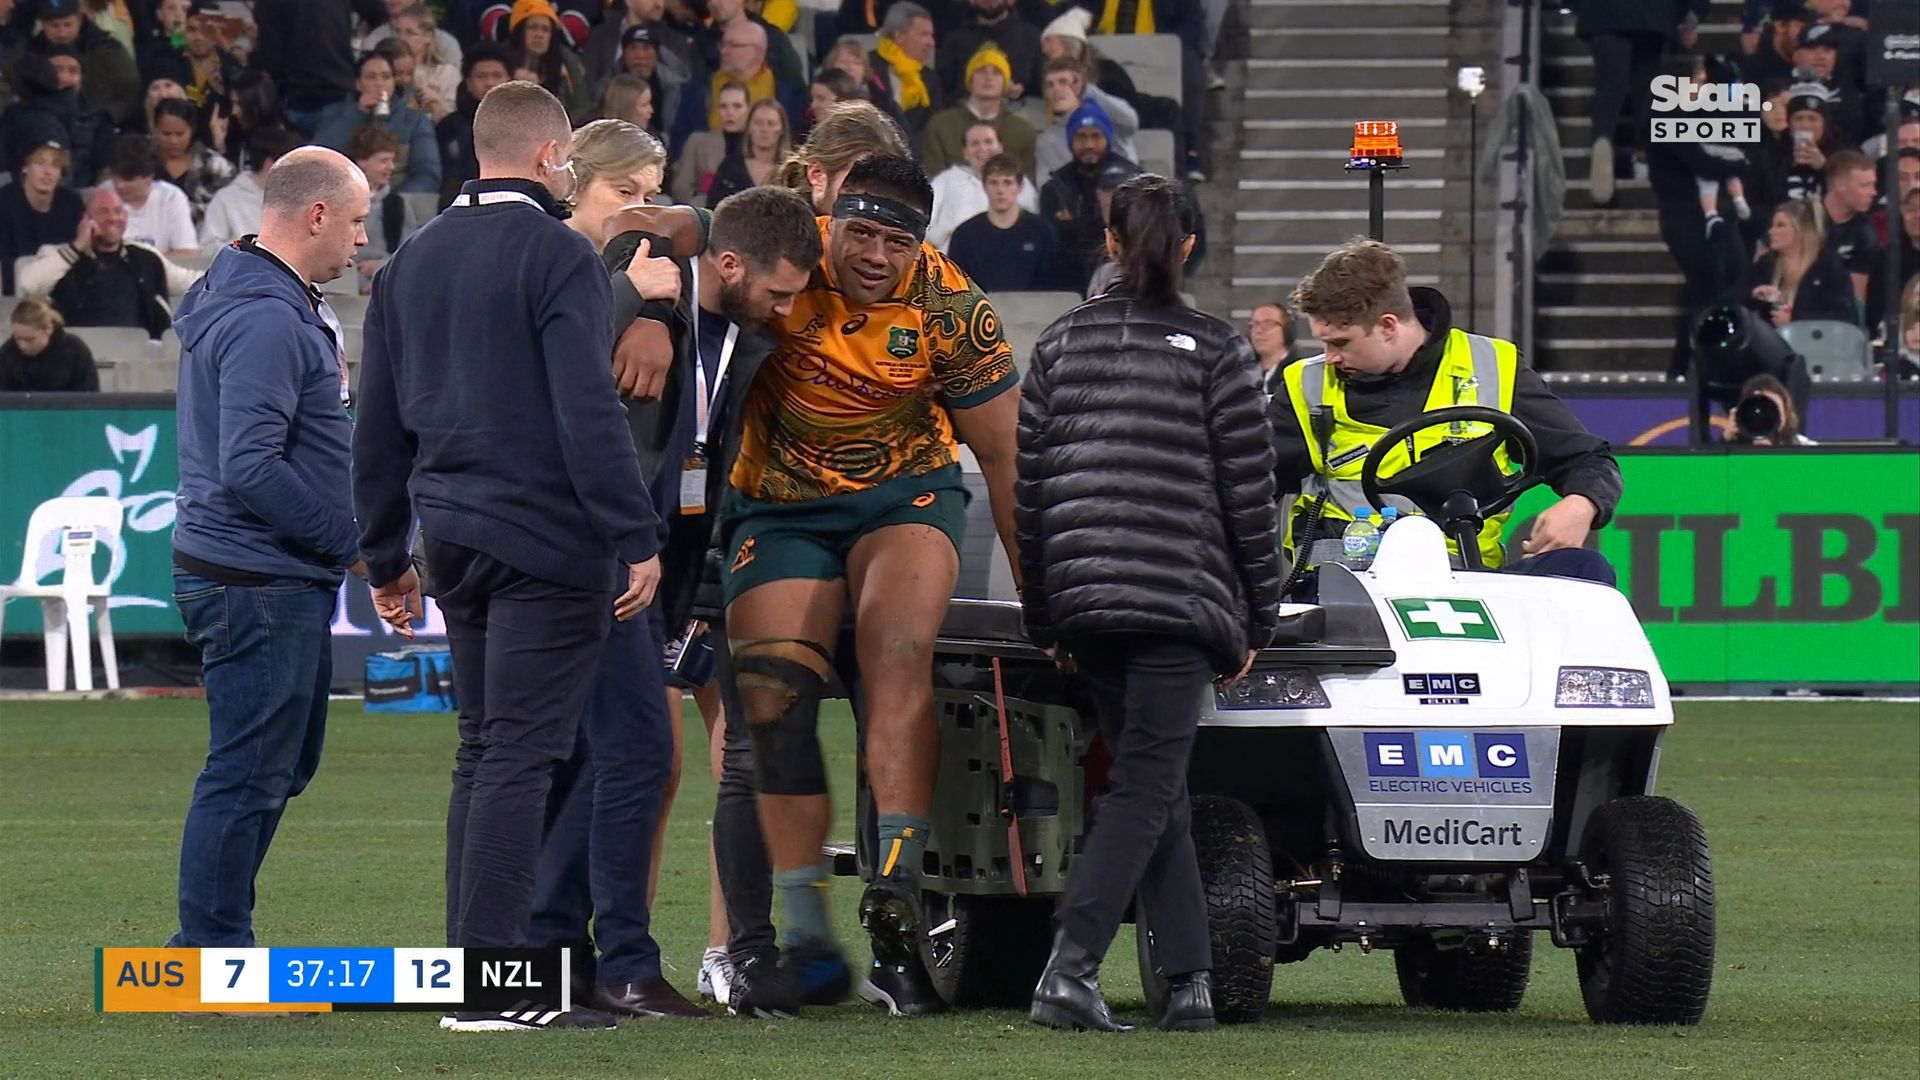 Wallabies co-captain Allan Alaalatoa set for surgery as mystery surrounds Michael Hooper's extended injury layoff